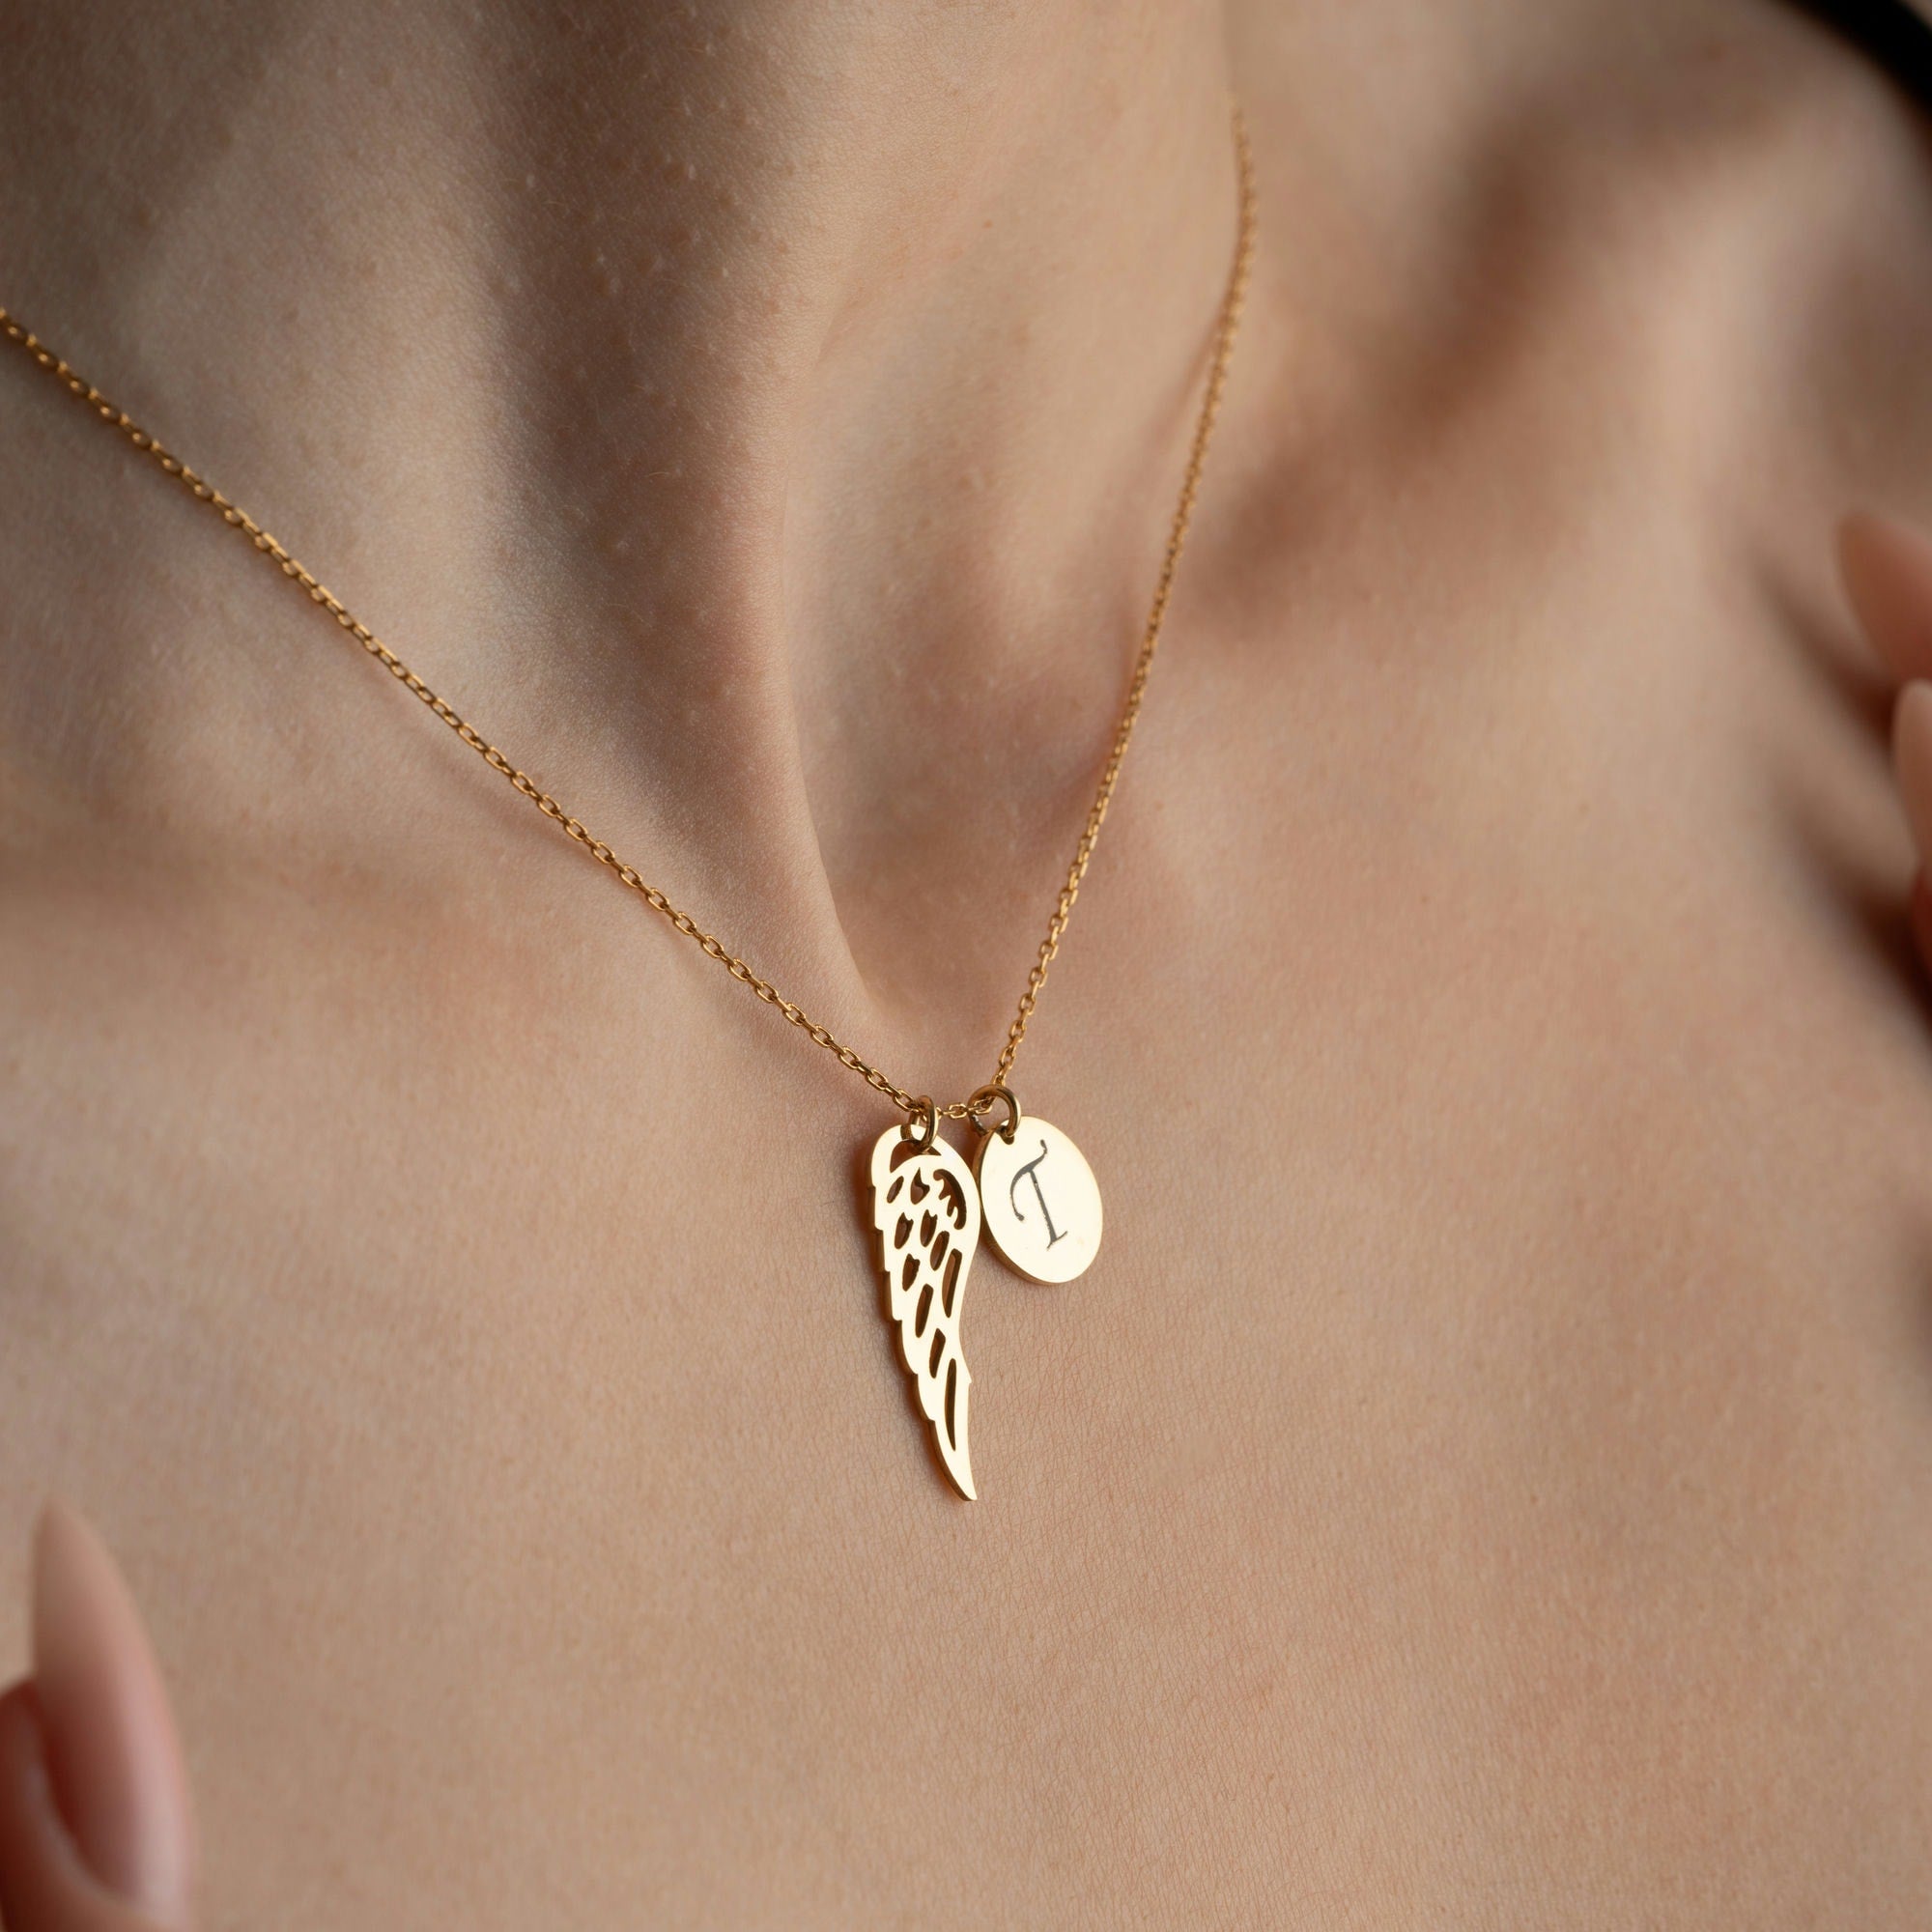 Angel Wing Necklace With Initial Charm